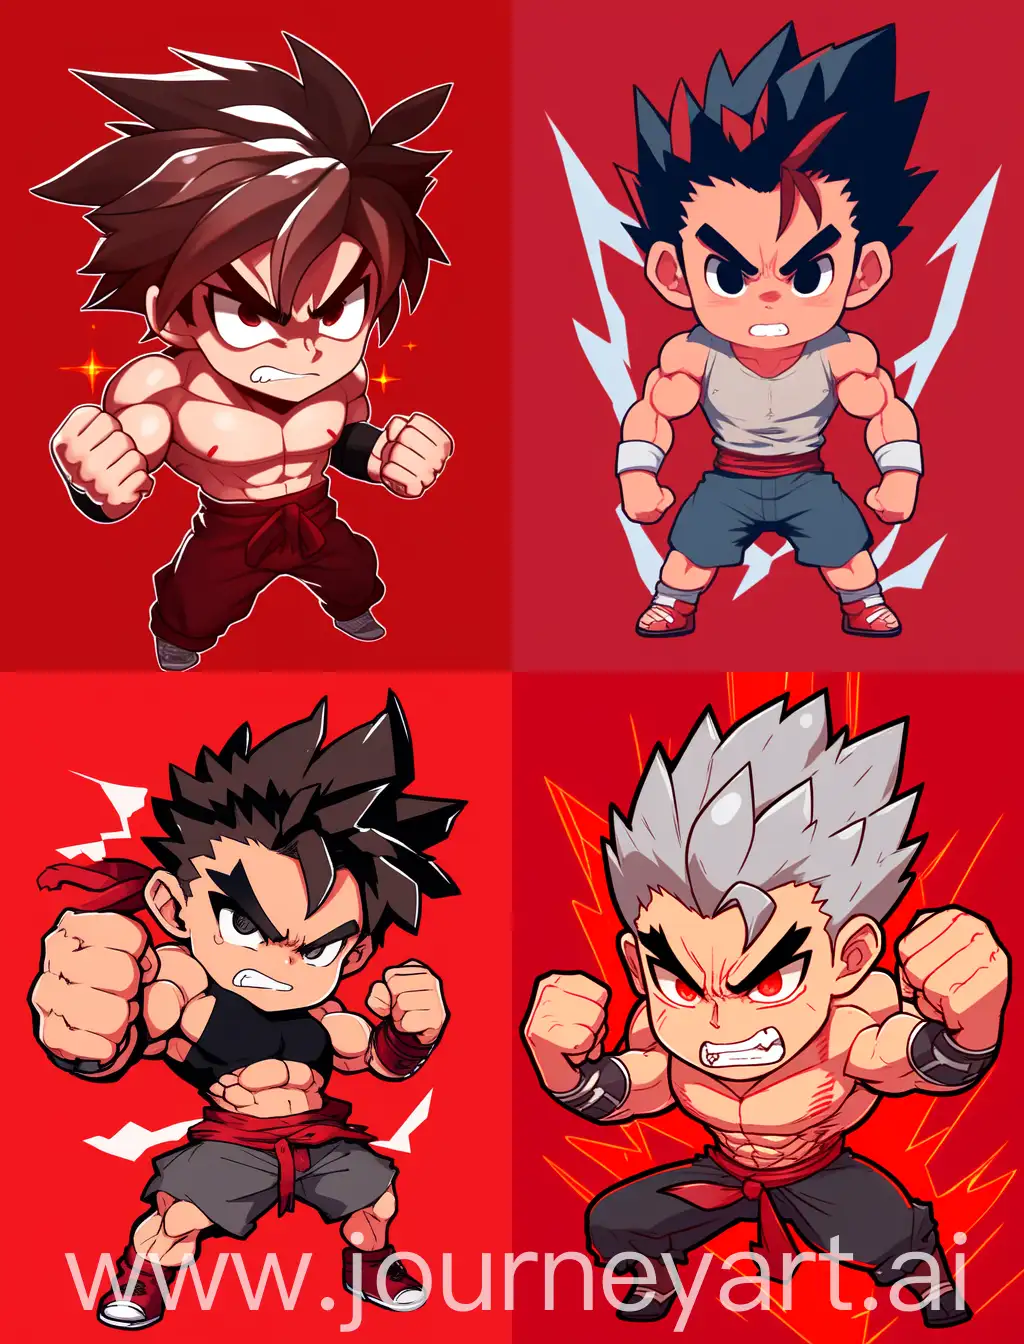 angry chibi anime guy showing muscles, cartoon anime style, with strong lines, with red solid background